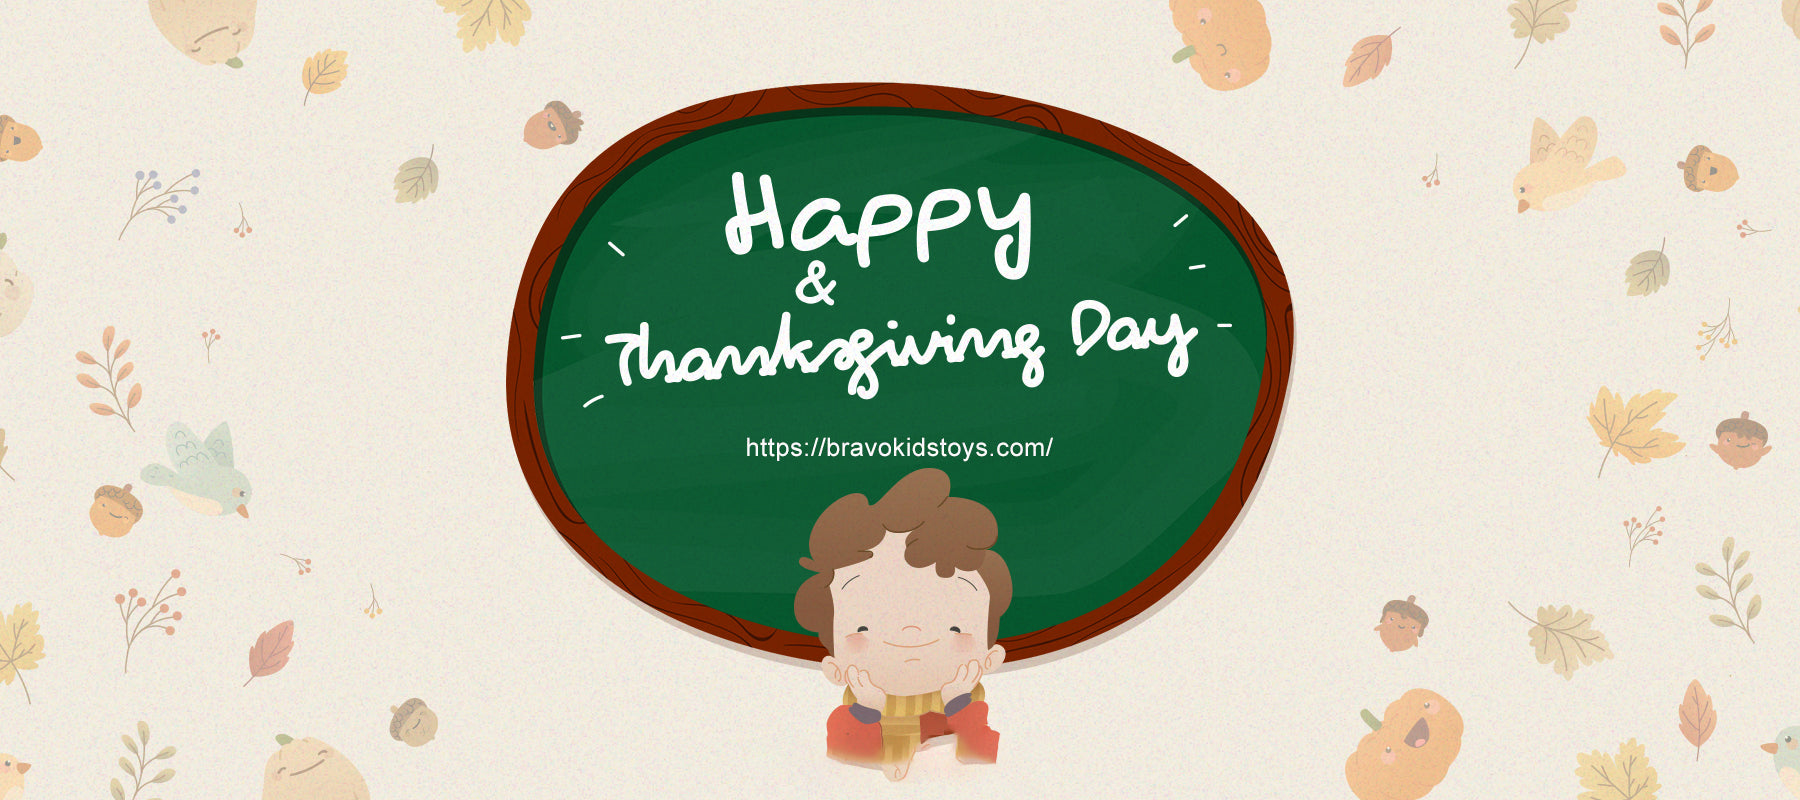 Some Activities to Do on Thanksgiving Day With Kids